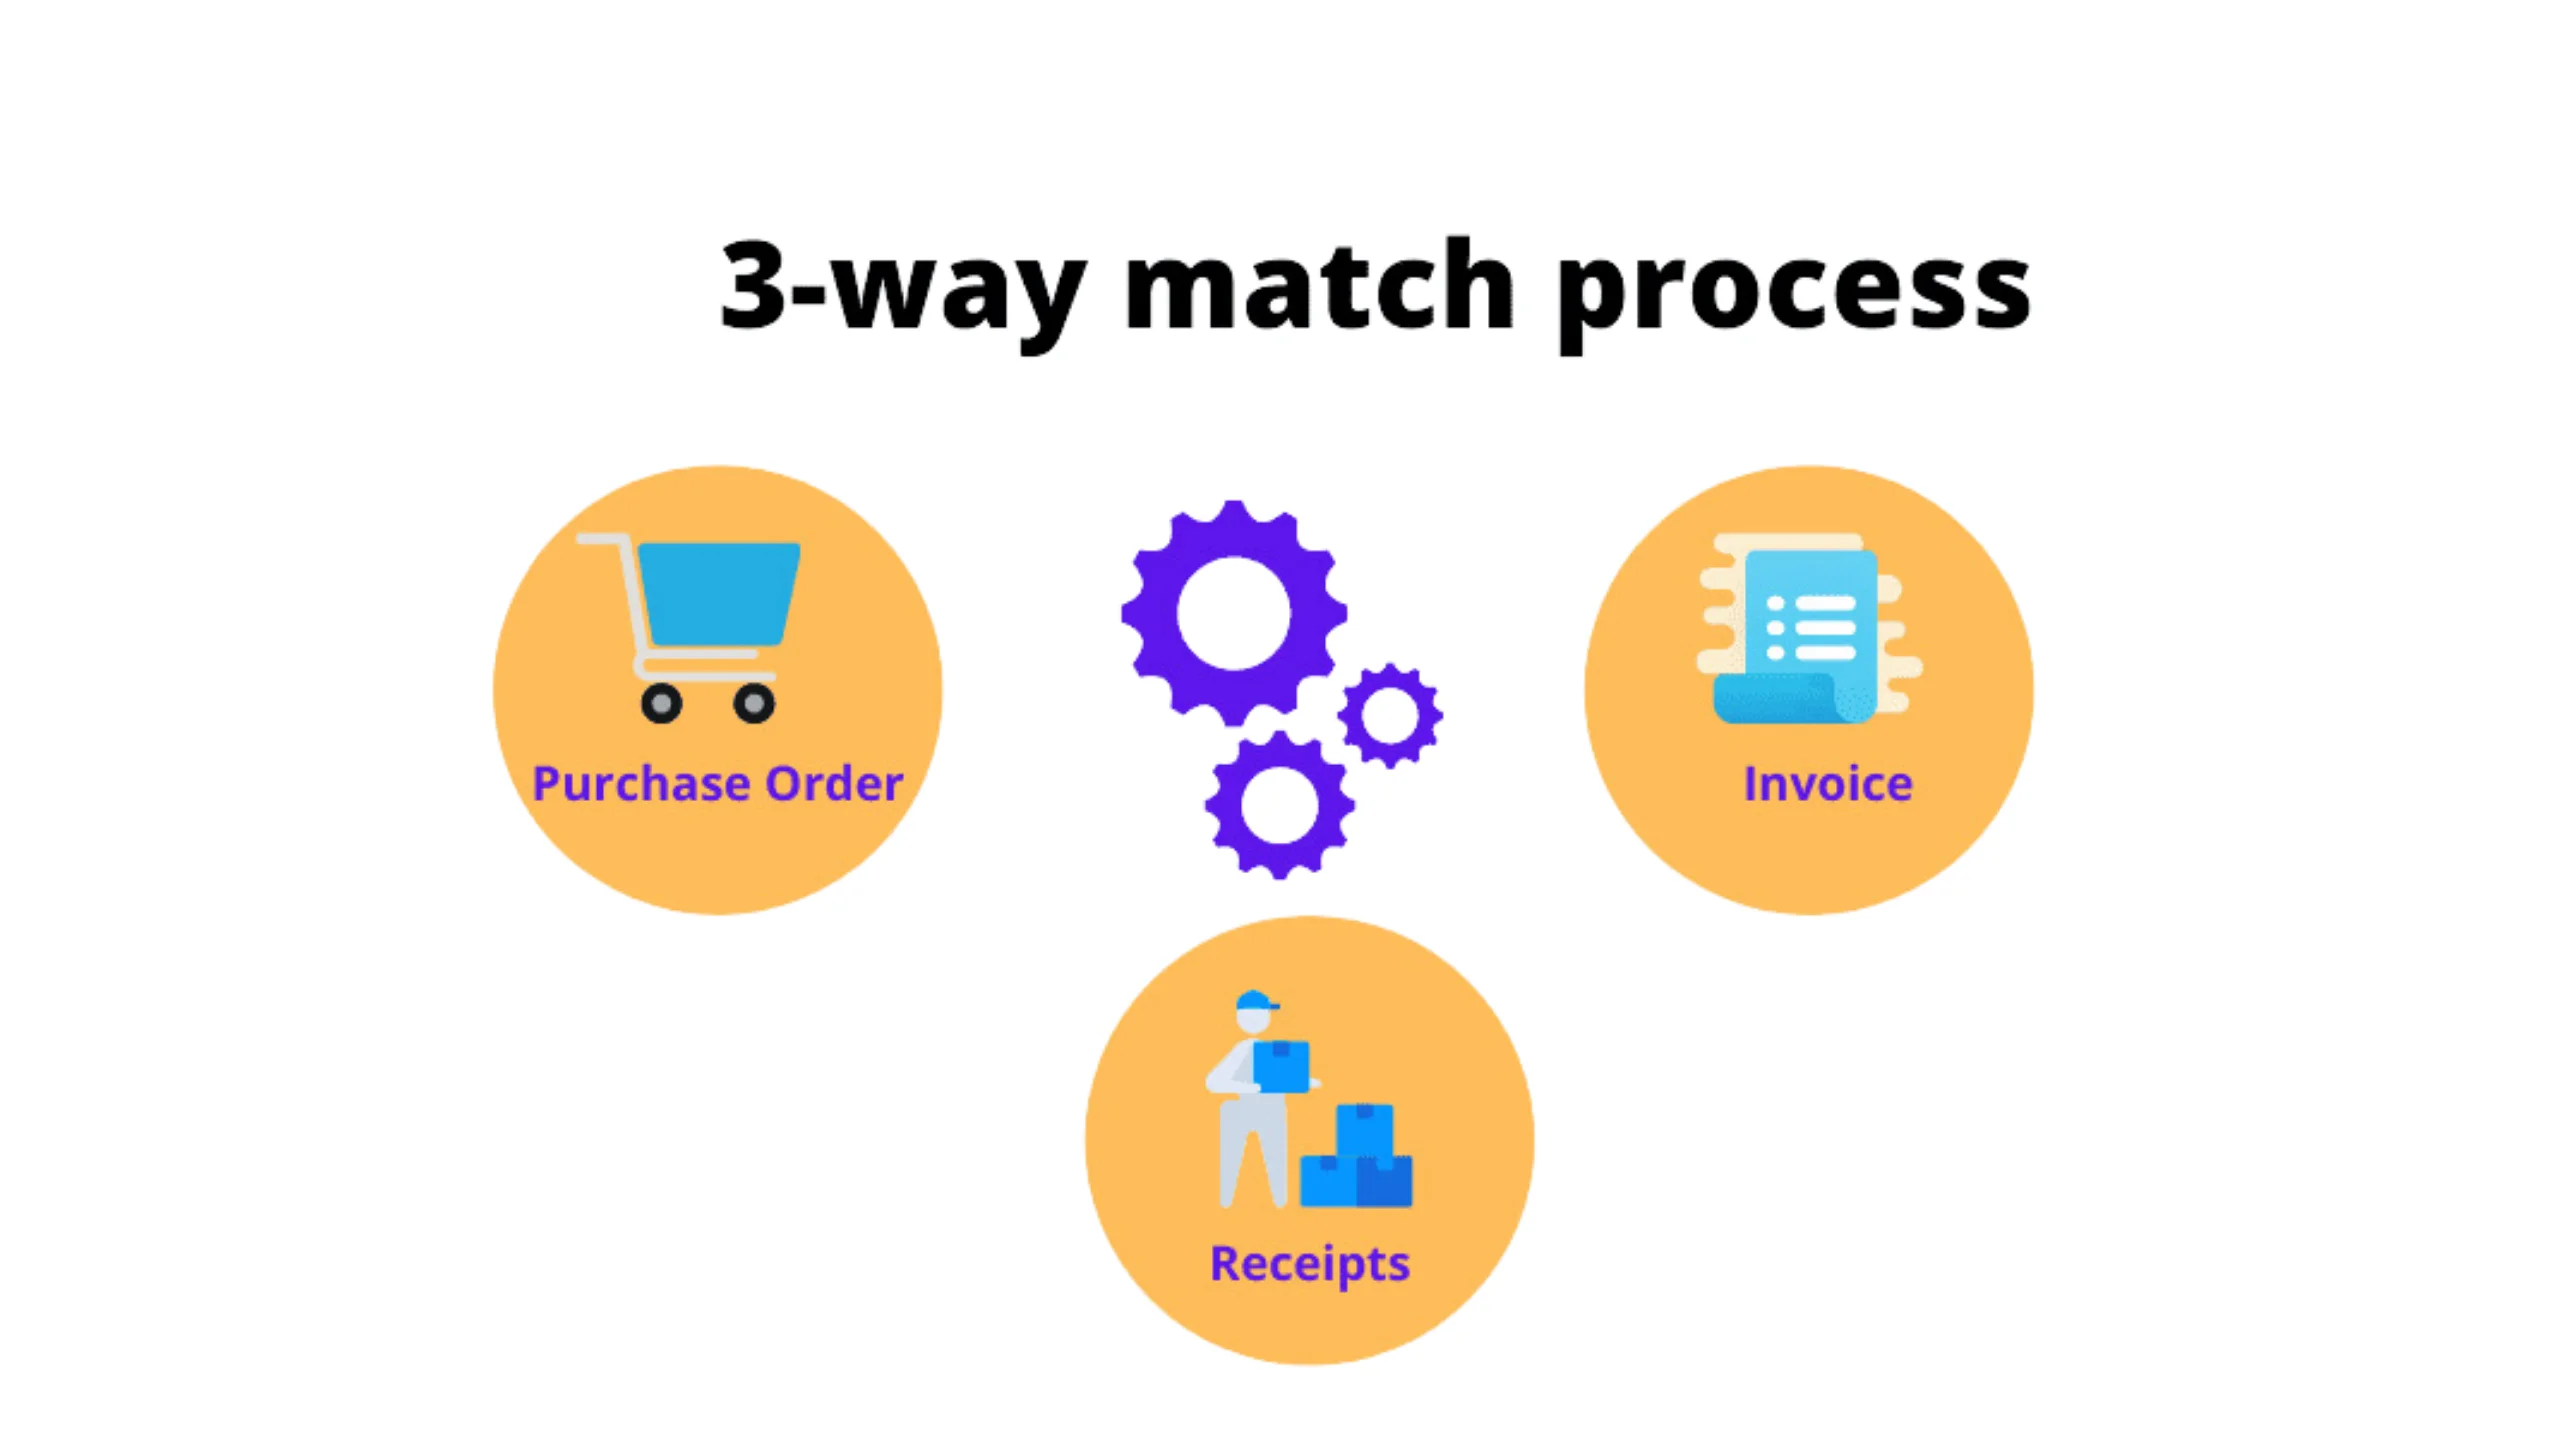 In accounts payable, the 3-way matching process involves comparing three key documents